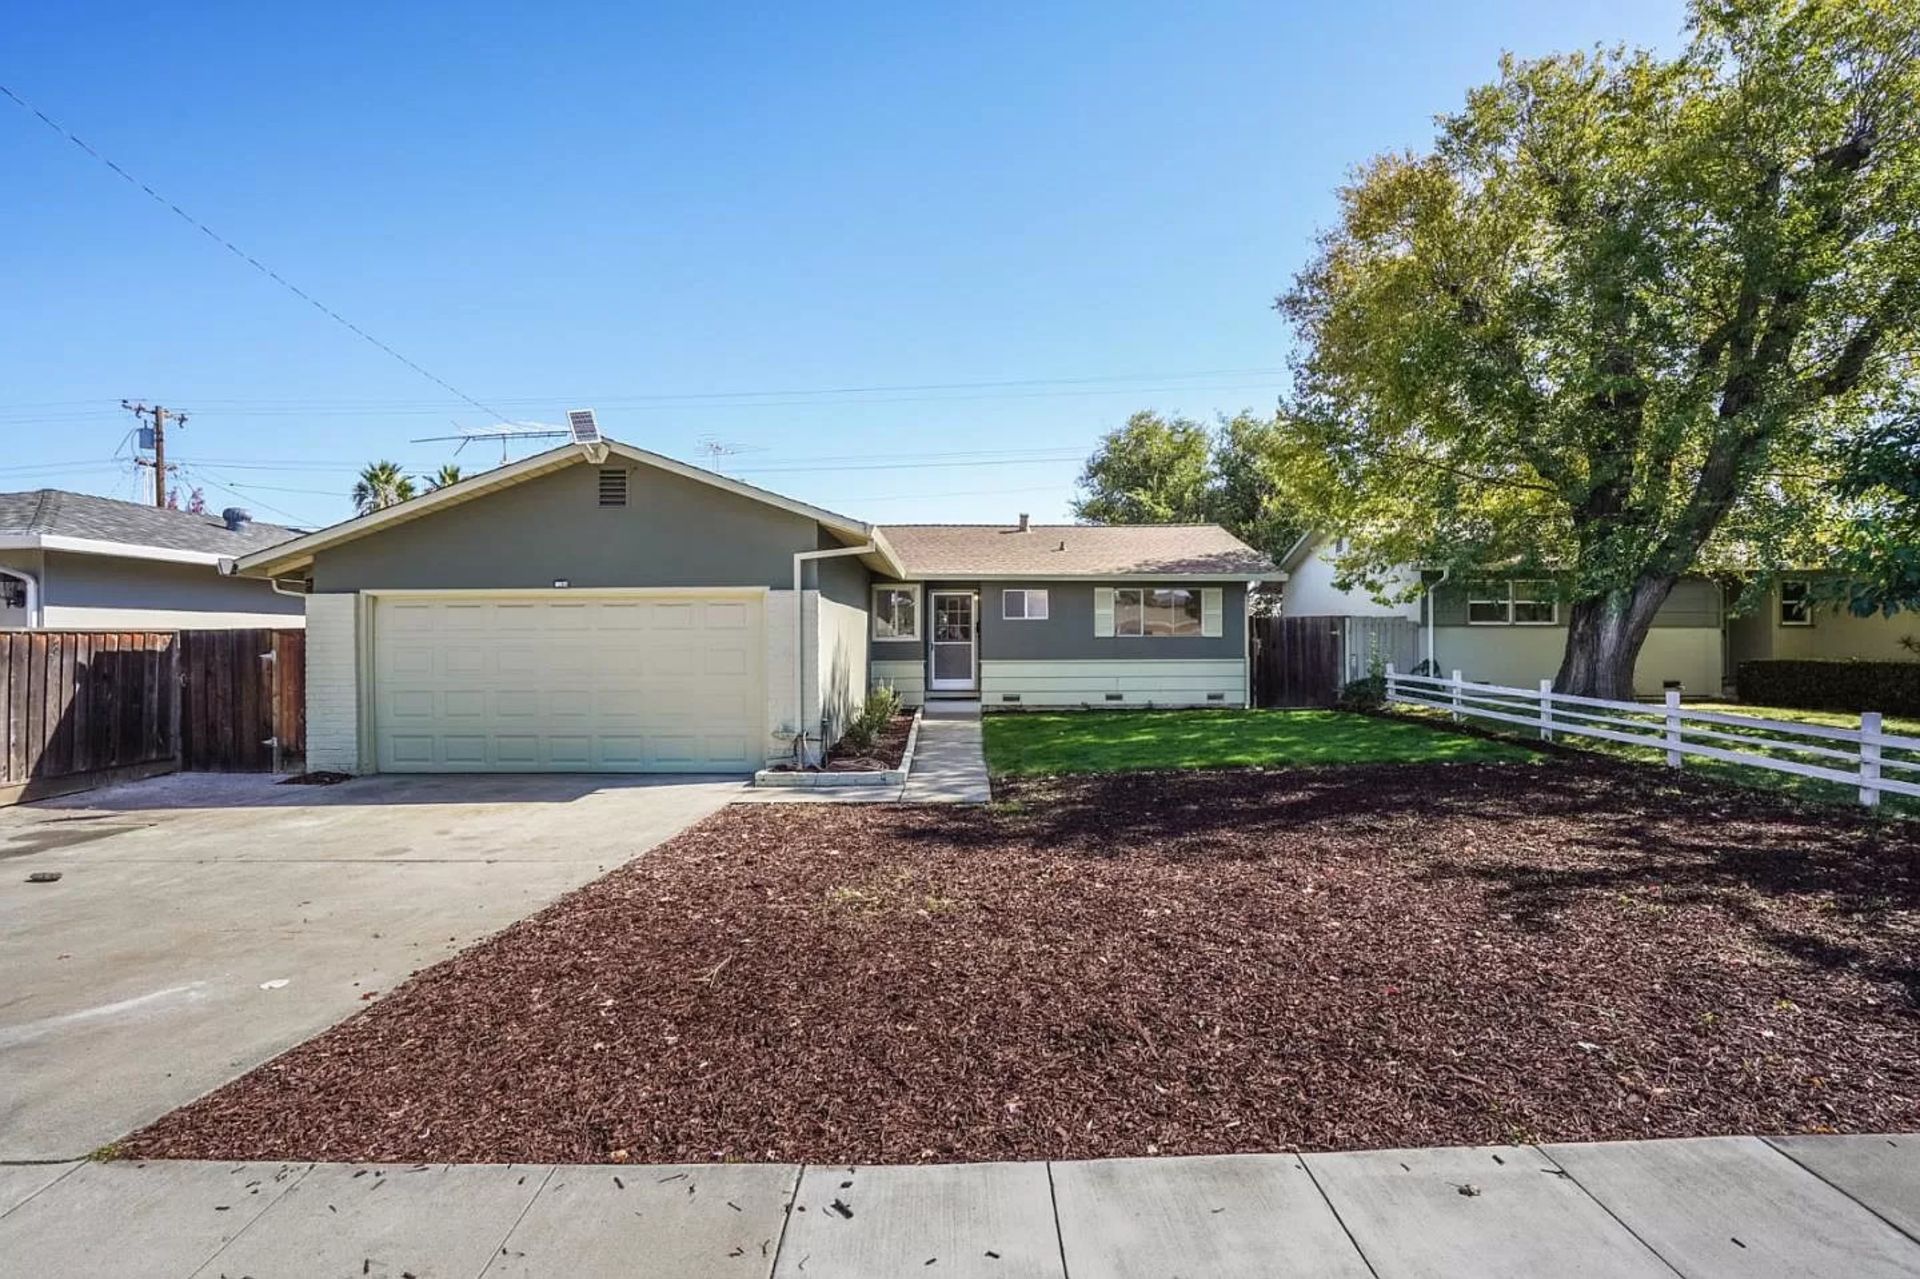 Sold! 4204 Leigh Ave, San Jose, CA